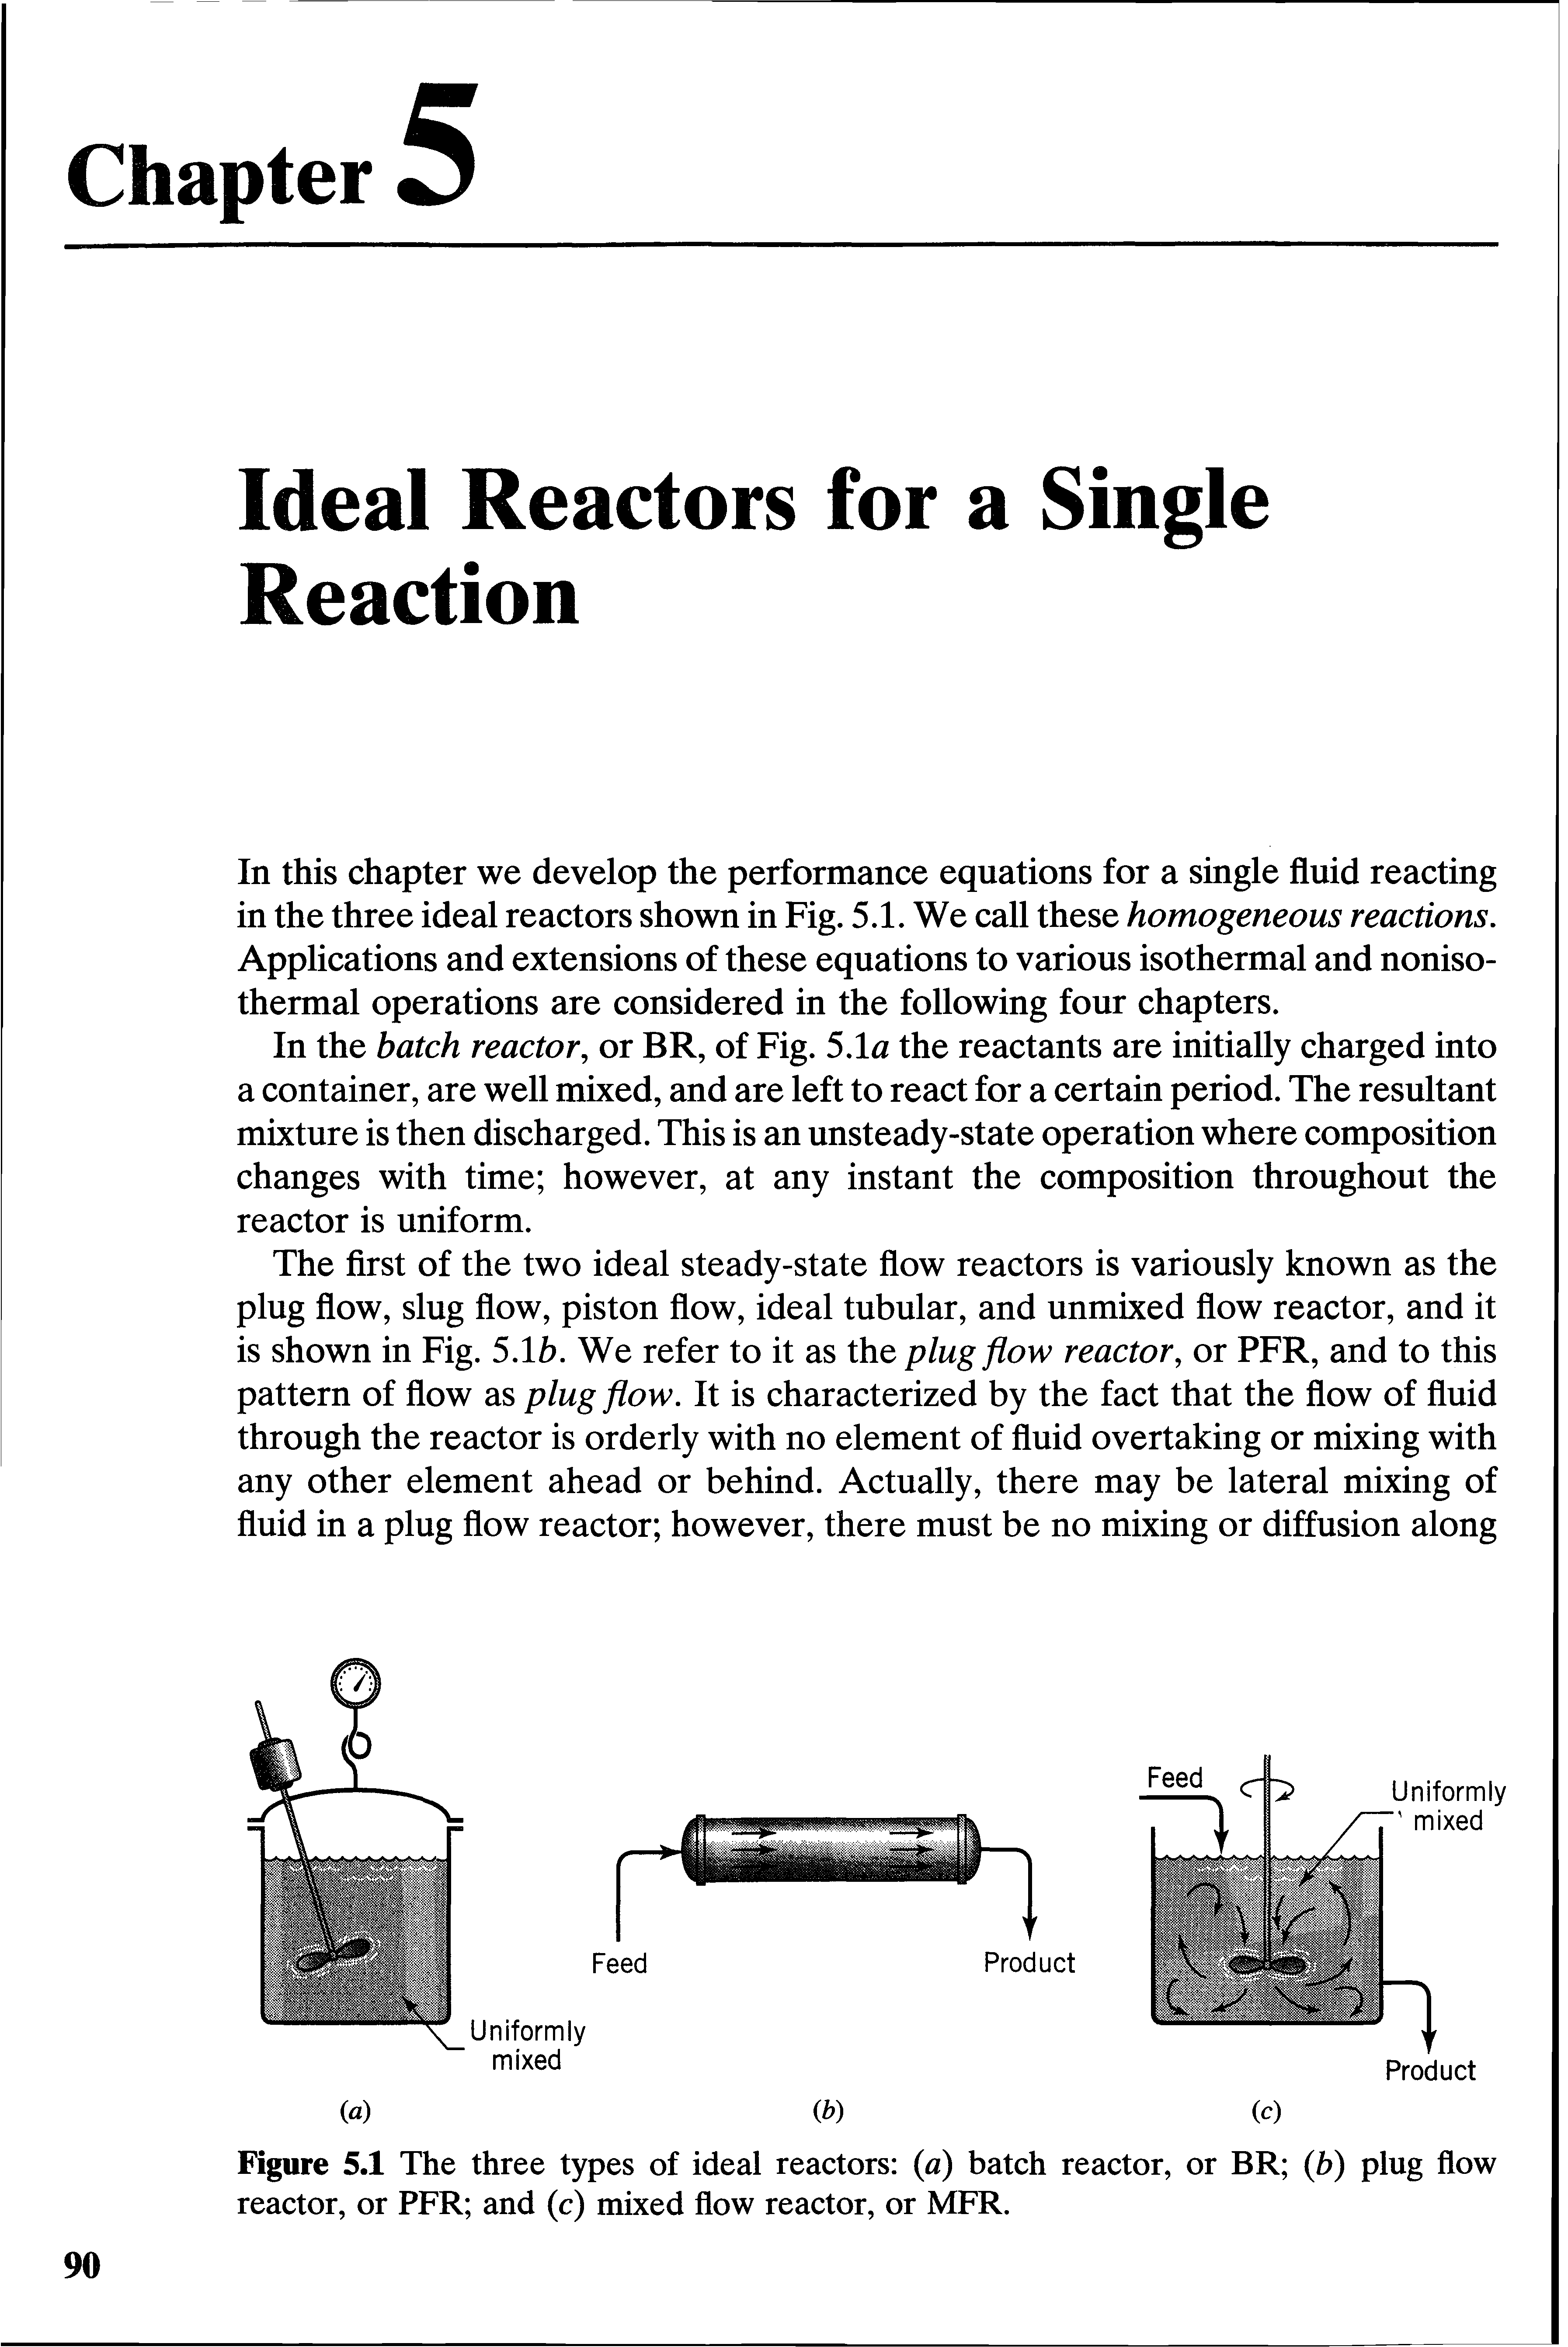 Figure 5.1 The three types of ideal reactors (a) batch reactor, or BR (b) plug flow reactor, or PFR and (c) mixed flow reactor, or MFR.